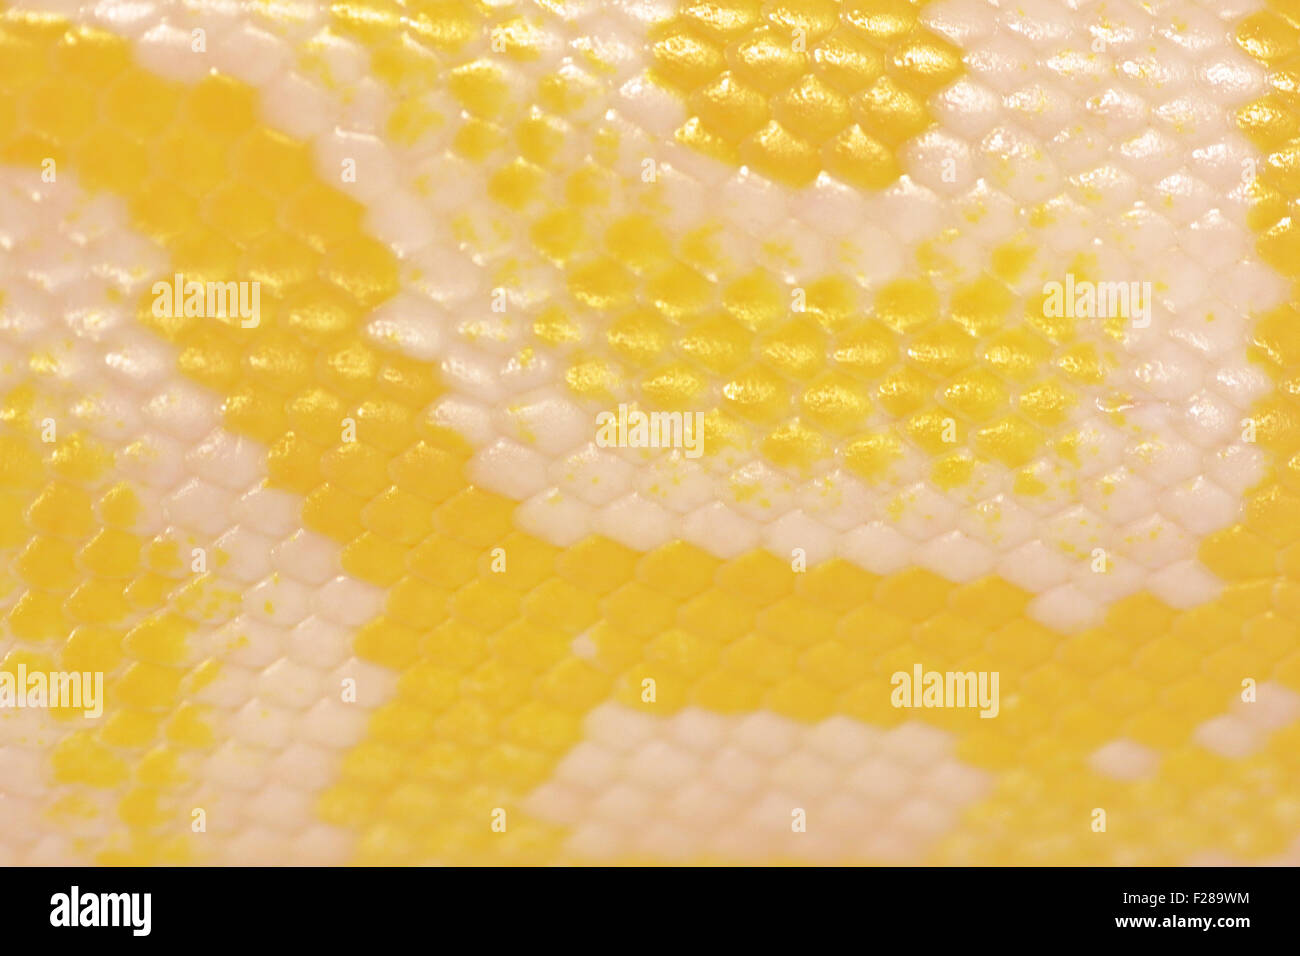 Closeup of skin and scales of a golden albino Indian Rock Python, Python molurus. The image can ben used a natural background. Stock Photo